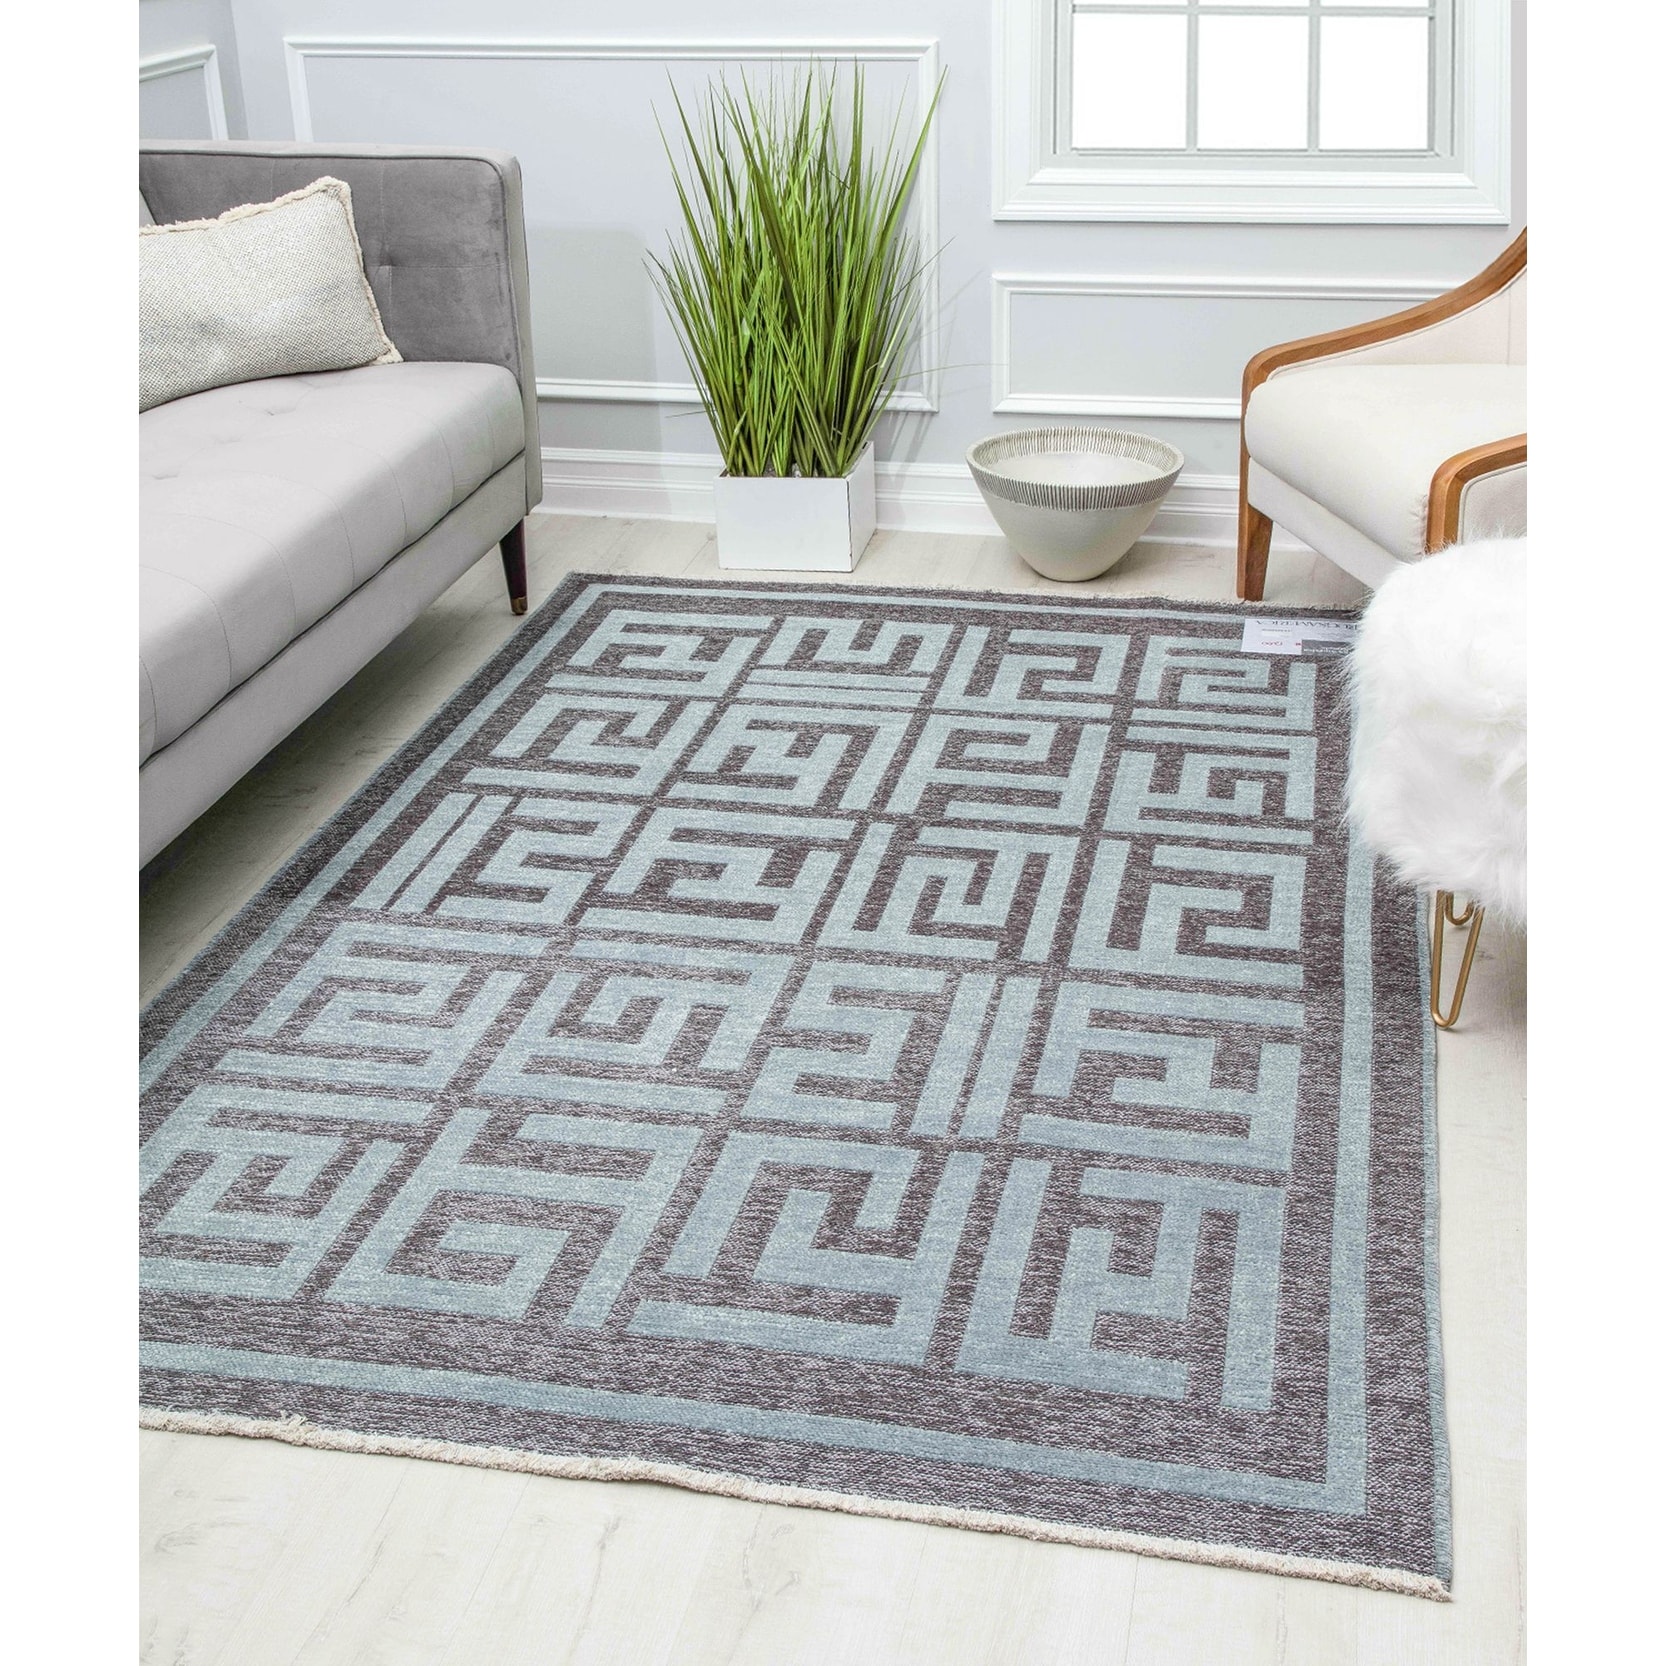 https://ak1.ostkcdn.com/images/products/is/images/direct/1d5fa78aaf6ccaa2315456b600f629e44e2414d4/Kai-Reversible-Flatweave-Vintage-Transitional-Area-Rug-by-Rugs-America.jpg